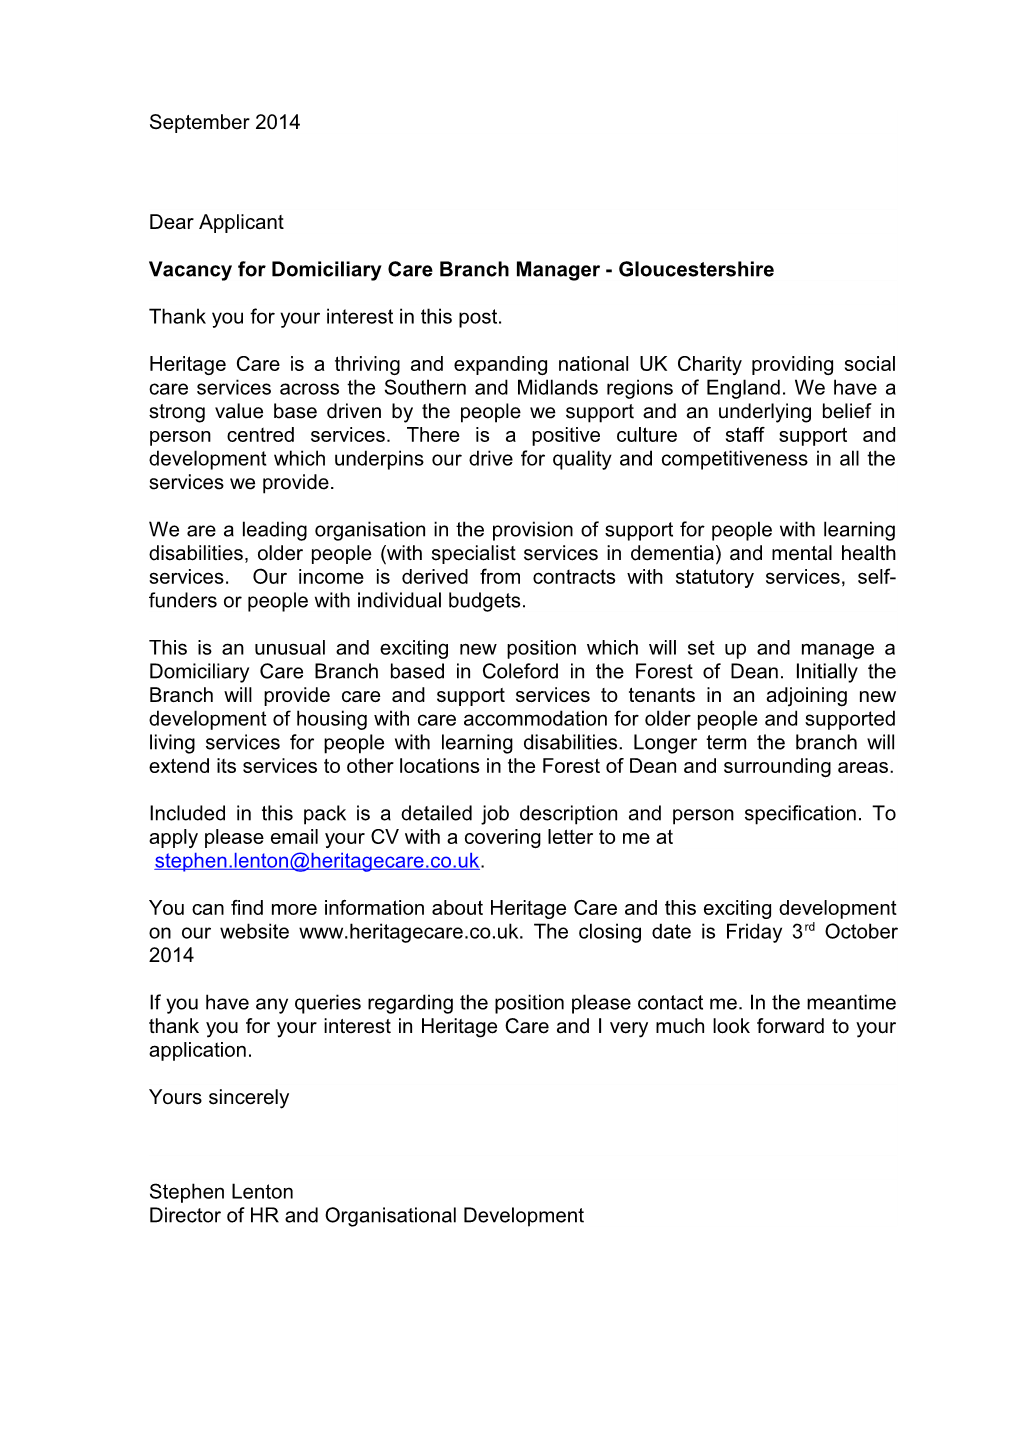 Vacancy for Domiciliary Care Branch Manager - Gloucestershire